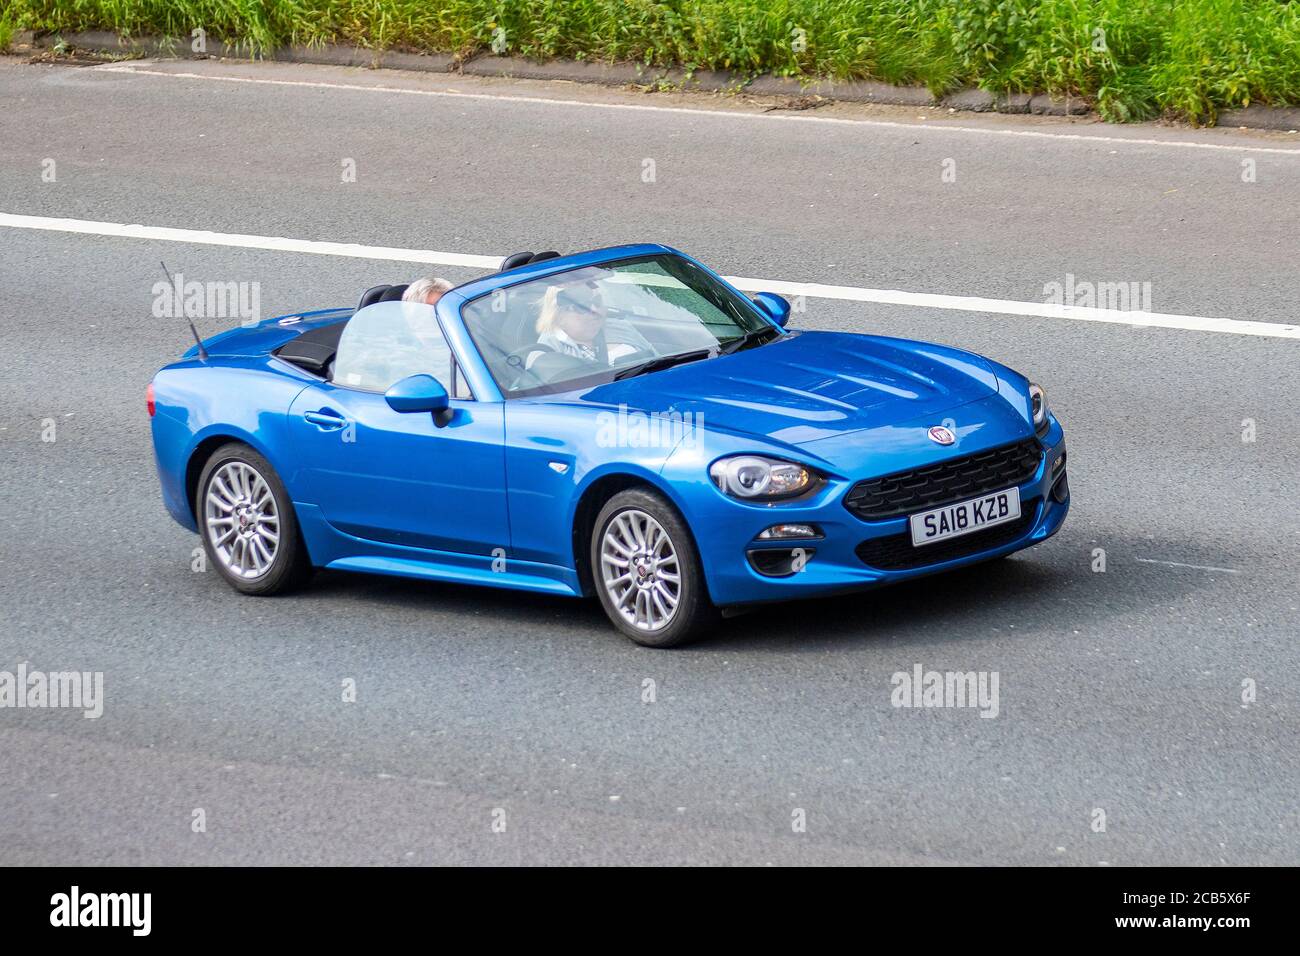 2018 blue Fiat 124 Spider Classica Multi; Vehicular traffic moving vehicles, cars driving vehicle on UK roads, motors, motoring on the M6 motorway highway network. Stock Photo